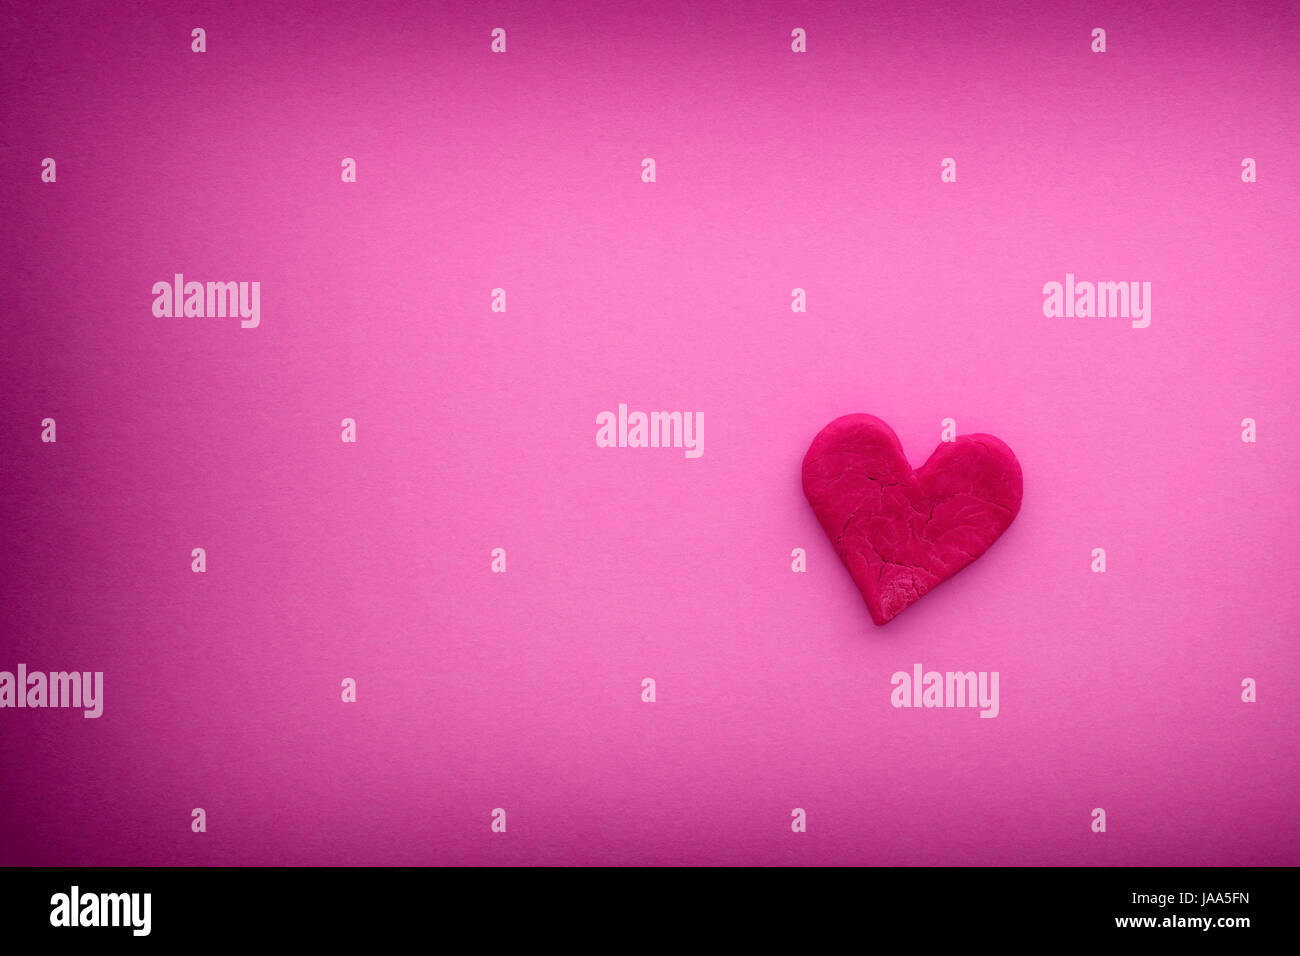 Red heart with small cracks on a pink background with vignette. Close up. Stock Photo